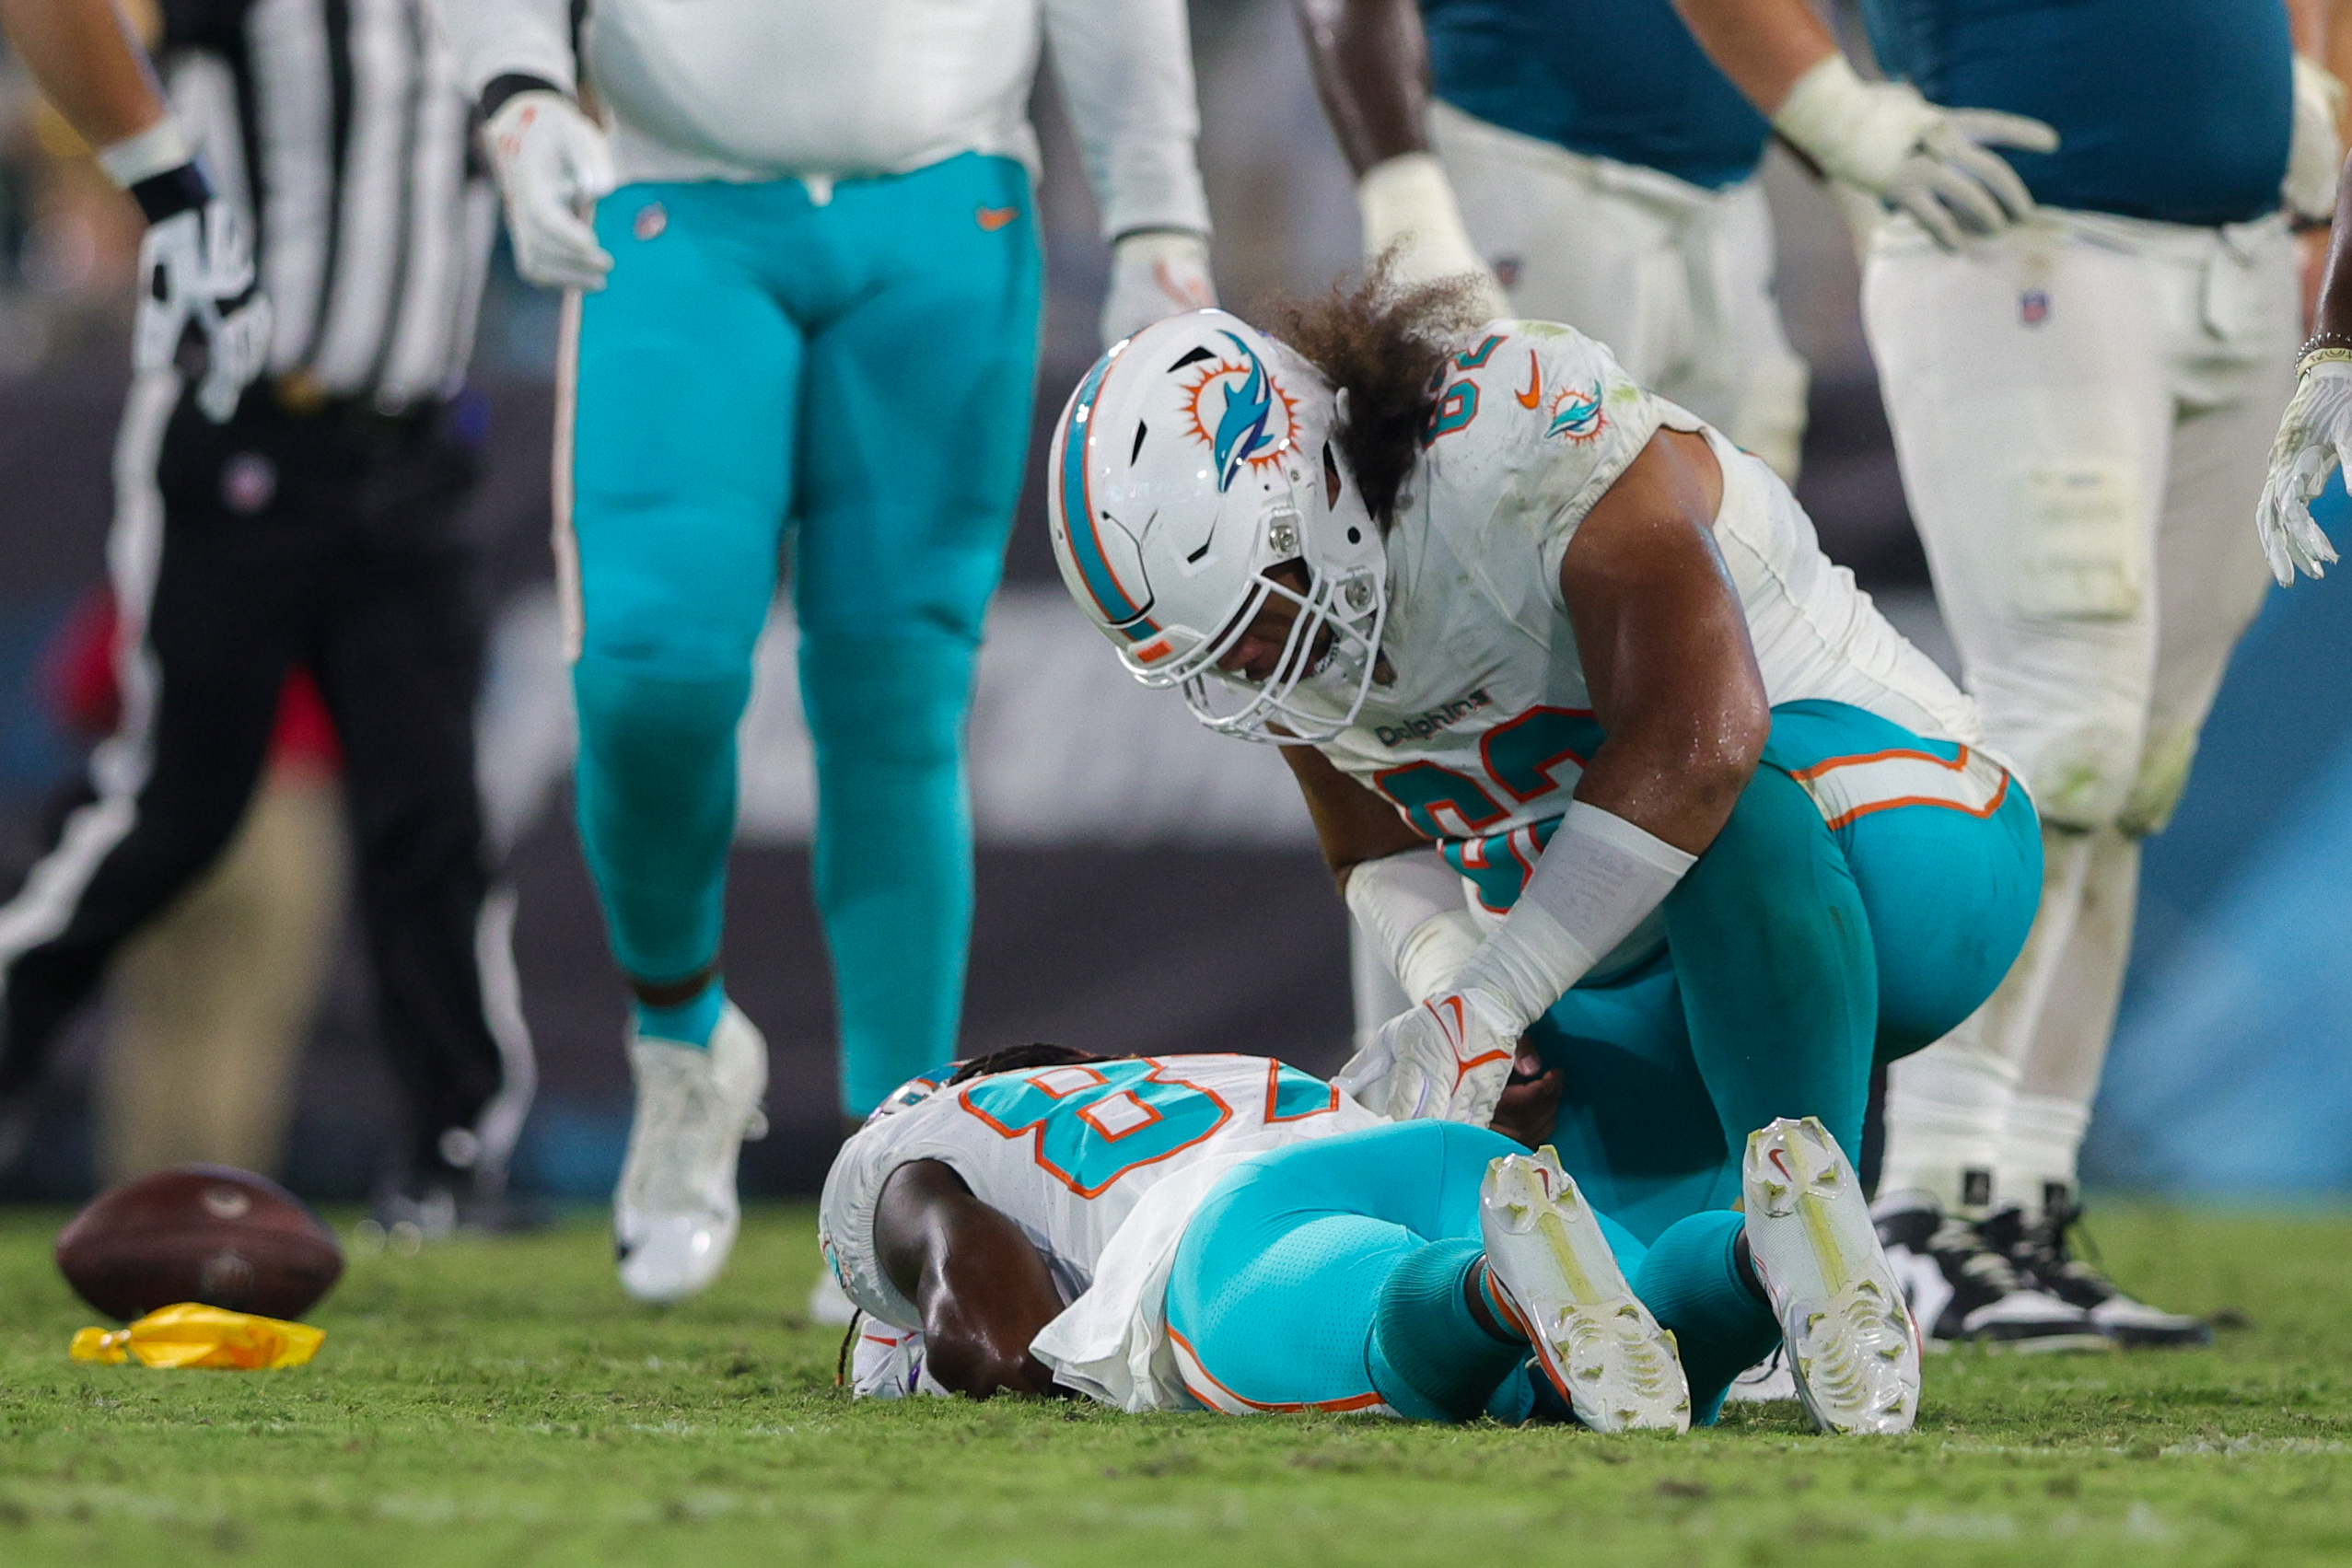 Dolphins' Daewood Davis conscious, moving after being carted off field